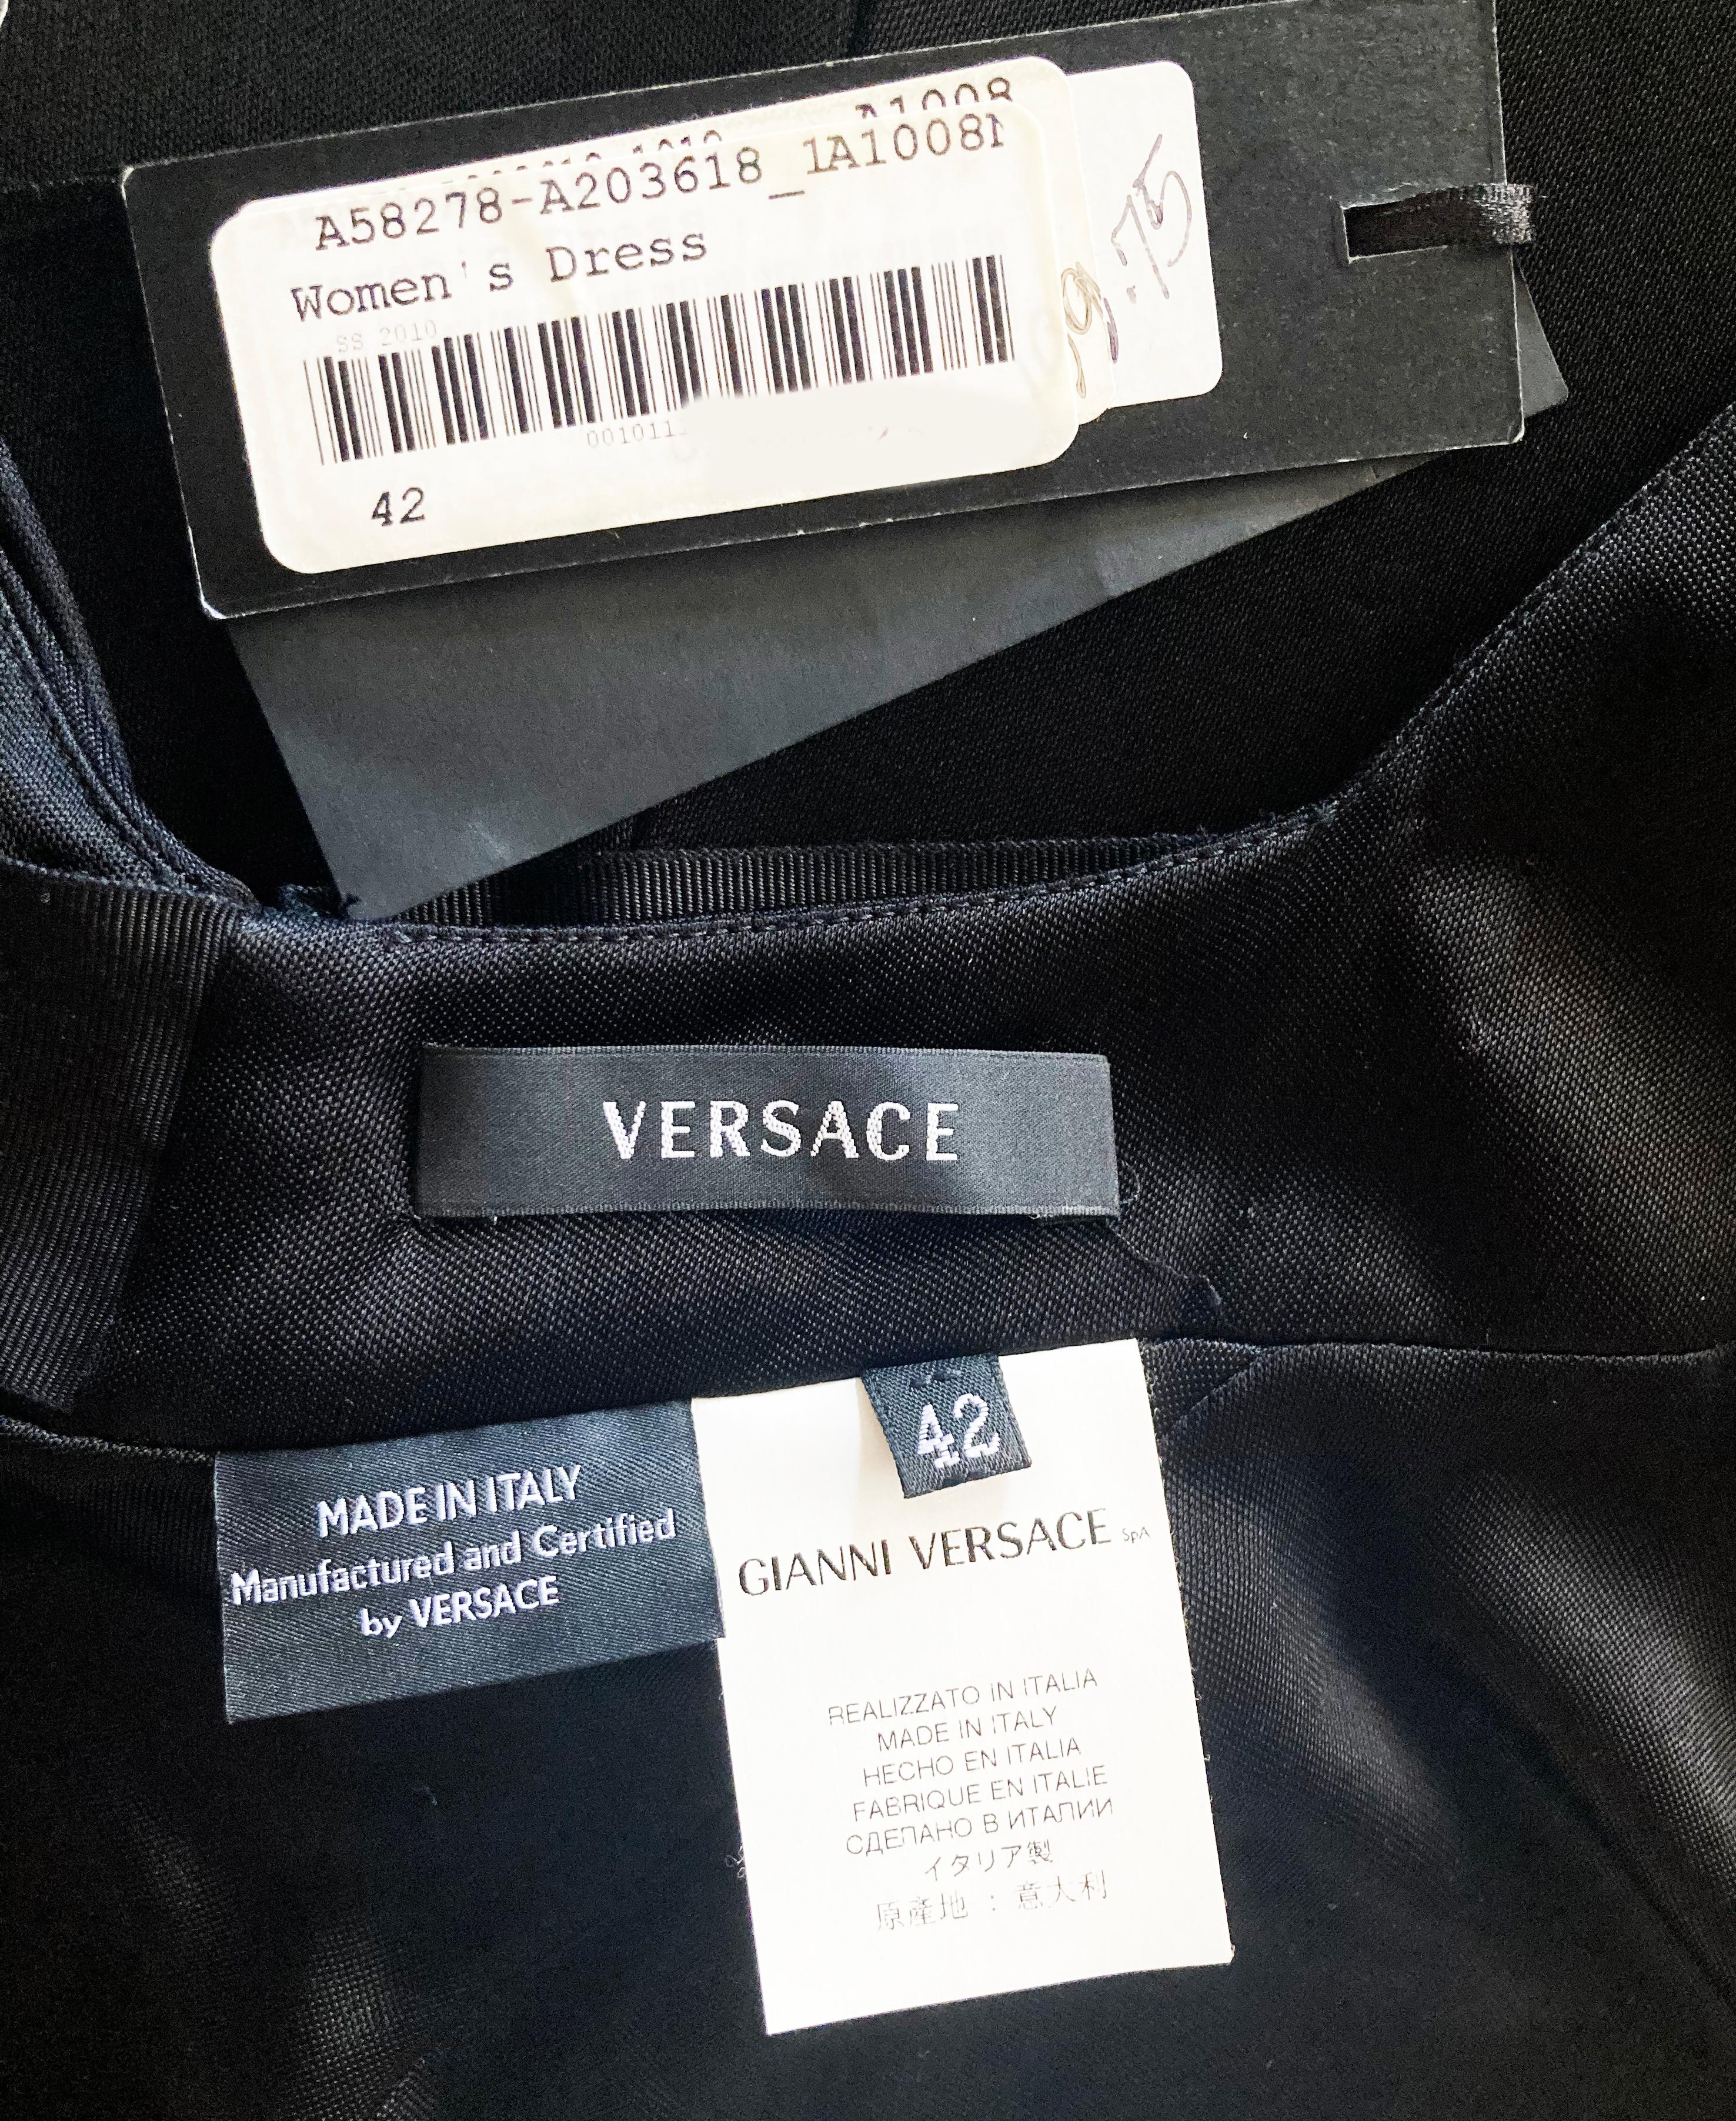 VERSACE BLACK VISCOSE LONG GOWN DRESS with OPEN BACK 42 - 6 For Sale 11